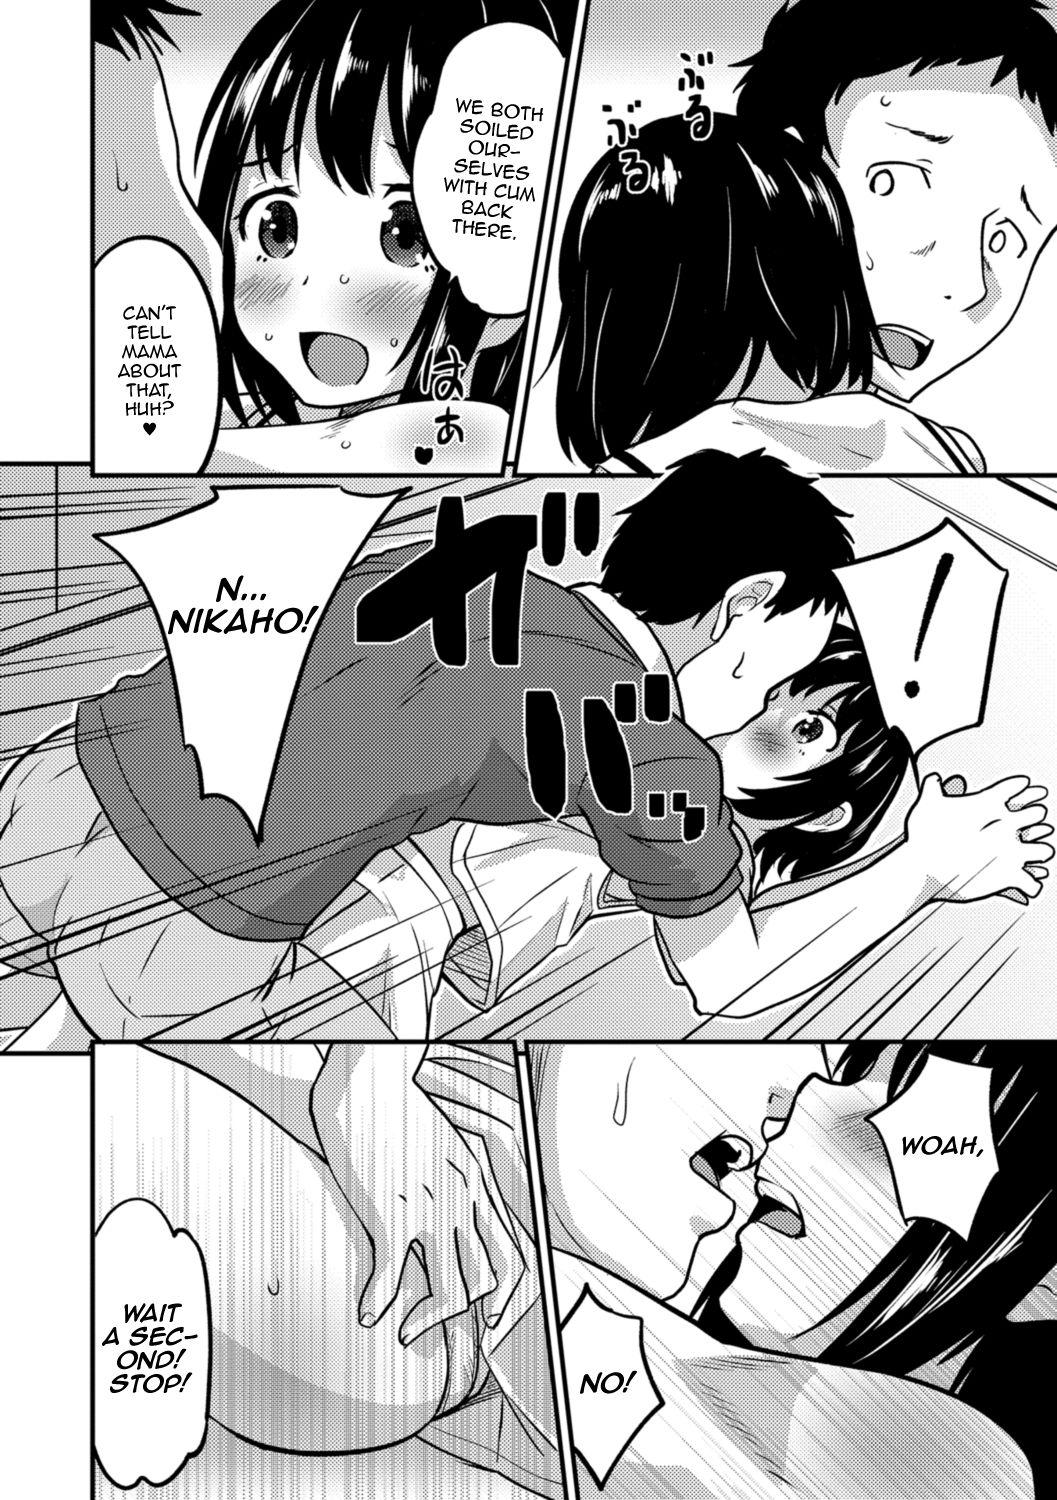 Exhib Kimi no Tsurego ni Koishiteru. | I'm in Love With Your Child From a Previous Marriage. Free Real Porn - Page 12